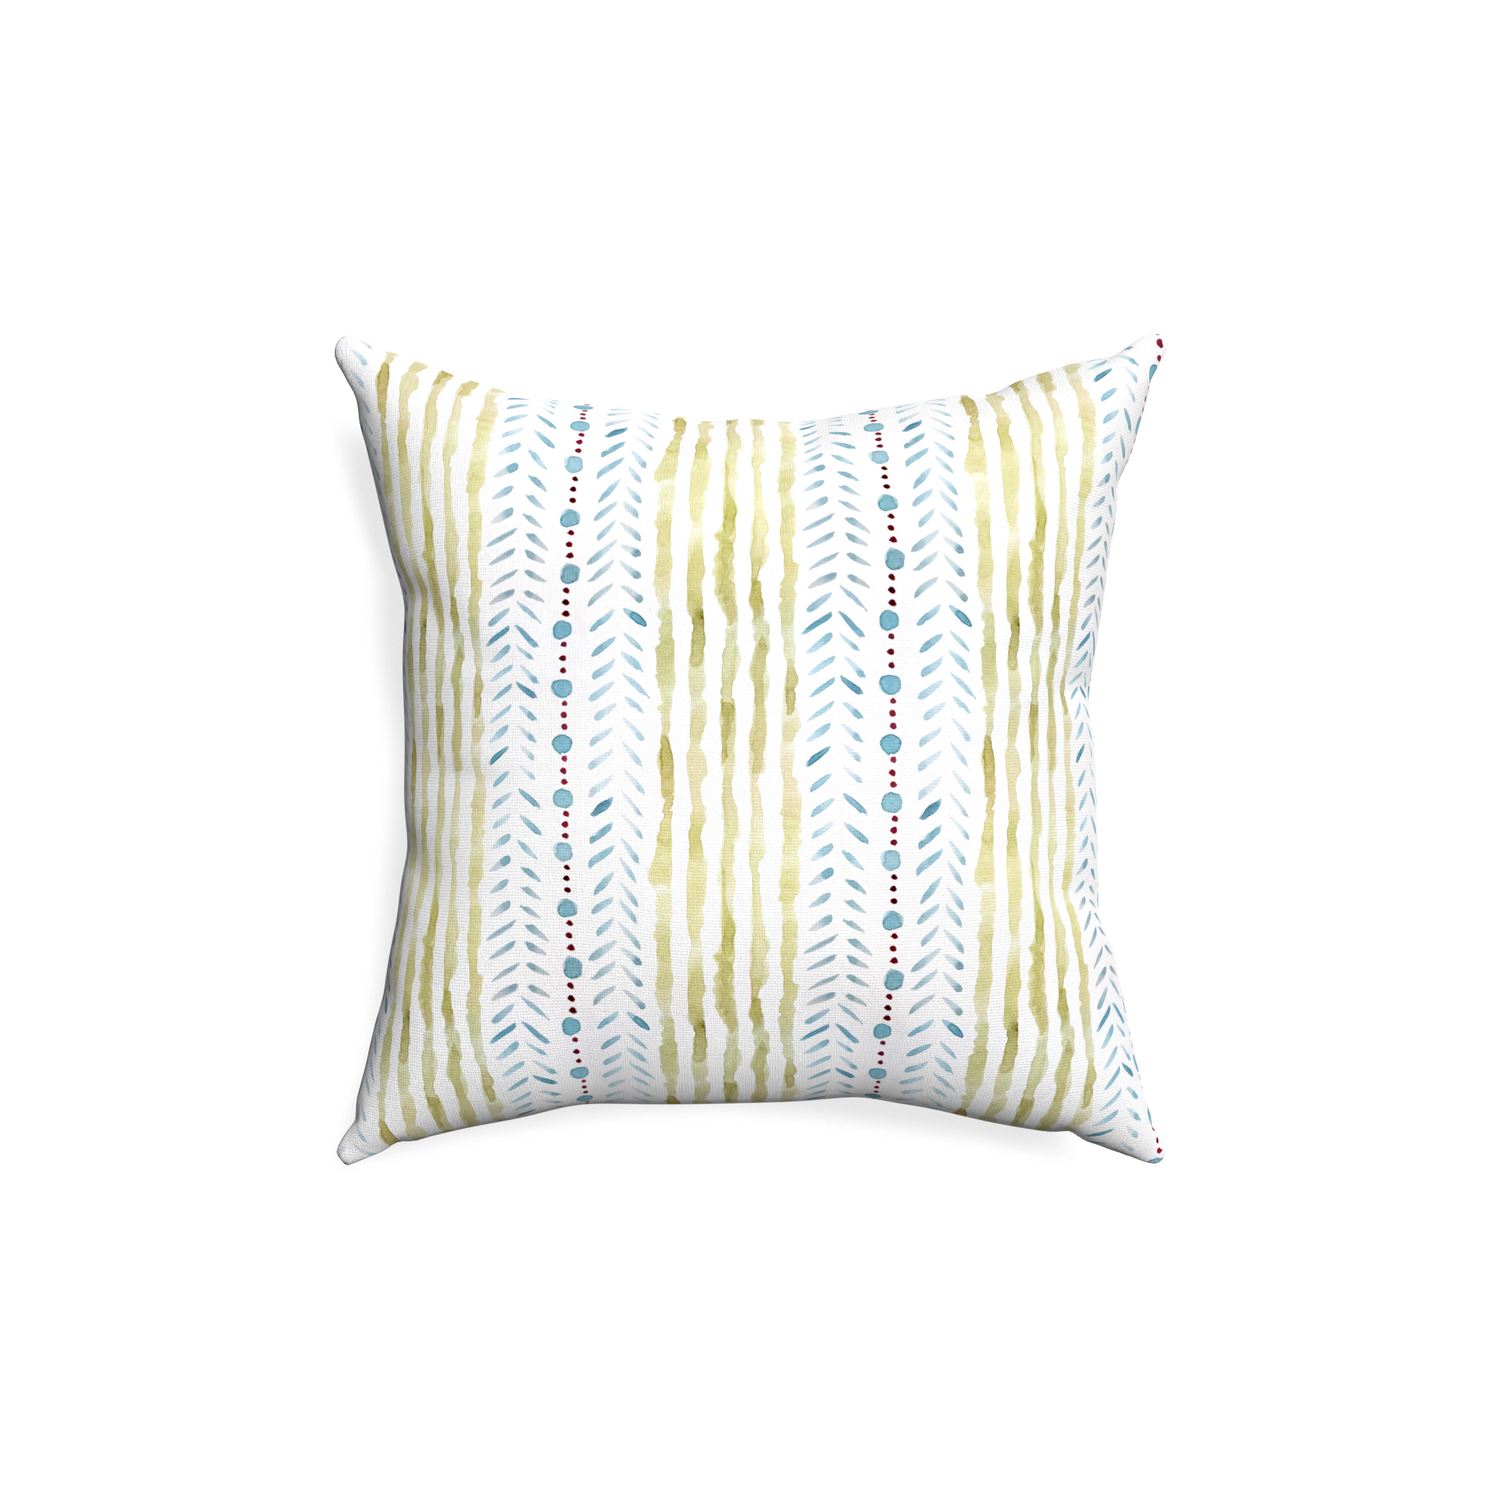 18-square julia custom pillow with none on white background